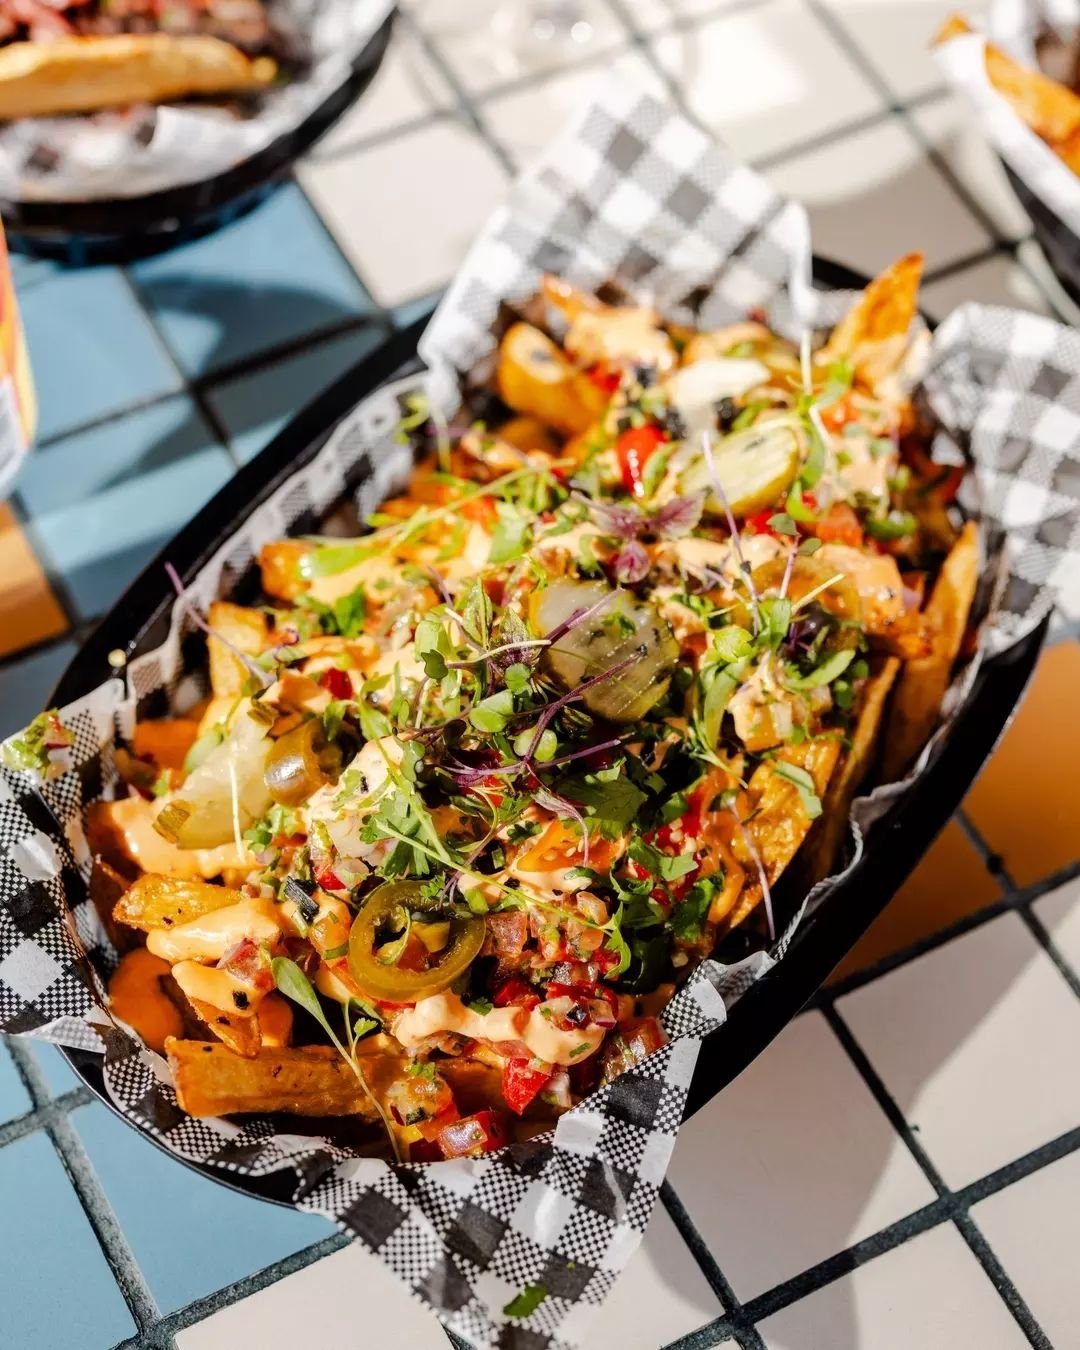 LOADED LATIN CHIPS 🍟🍟 With vice sauce, bell pepper sauce, pickles, jalepenos &amp; biquinos. Get your fingers dirty and dig in.